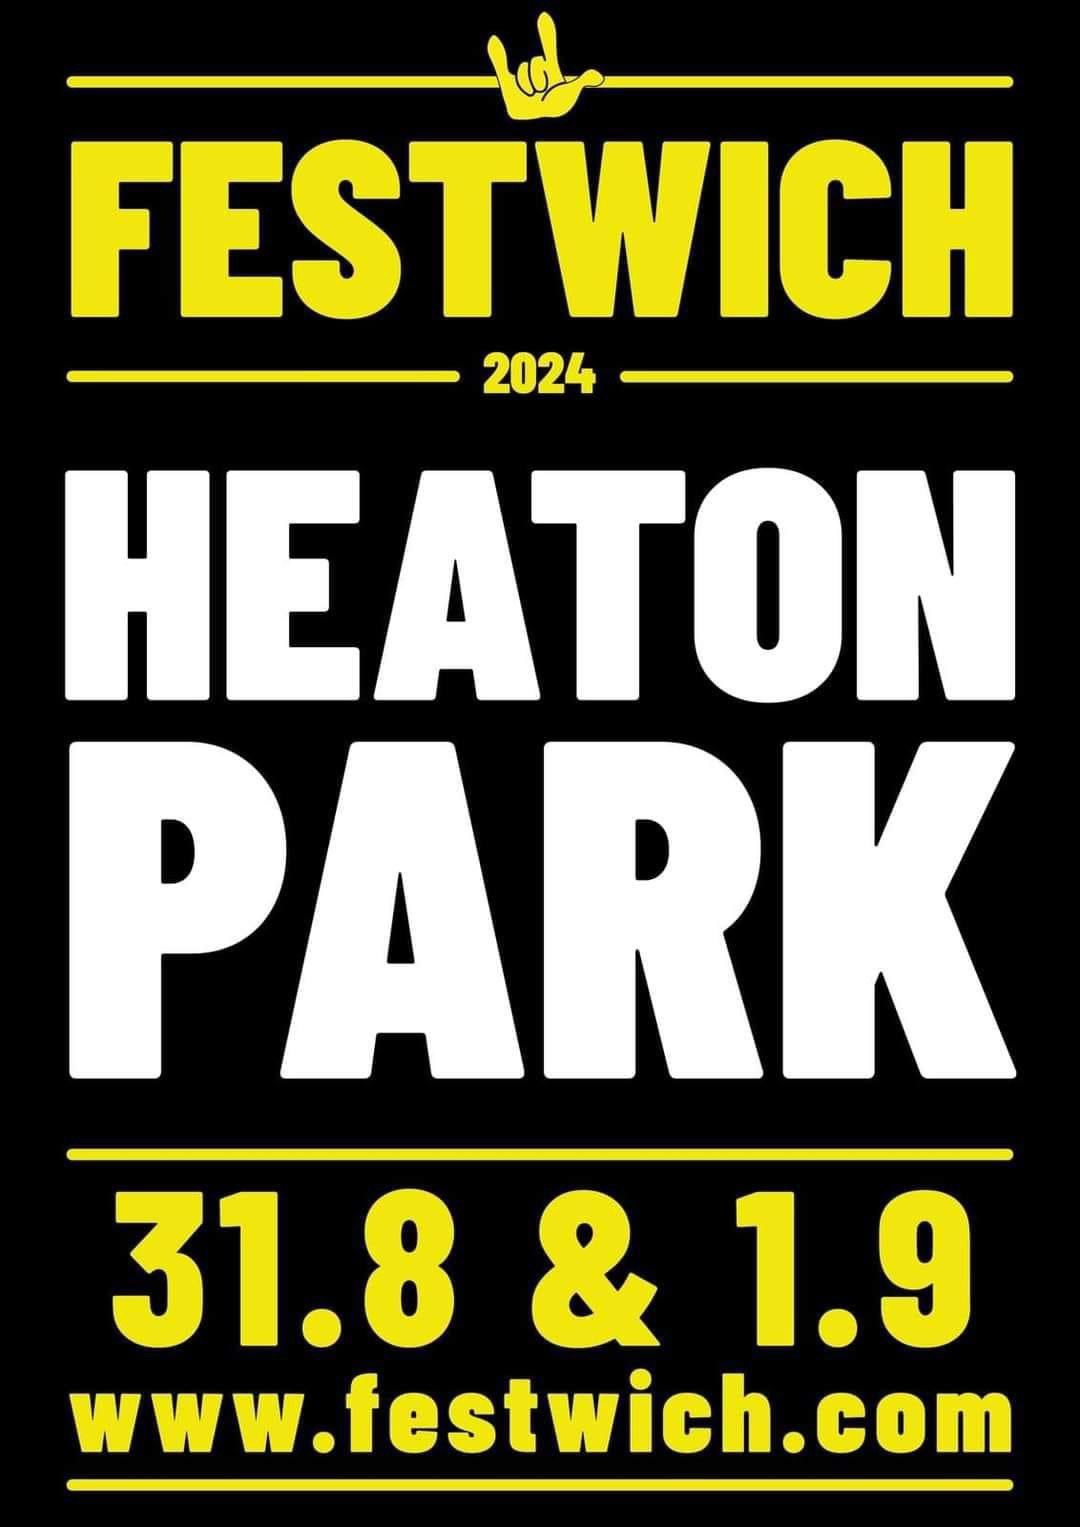 (Appearing at) Festwich Festival. Heaton Park. Manchester 